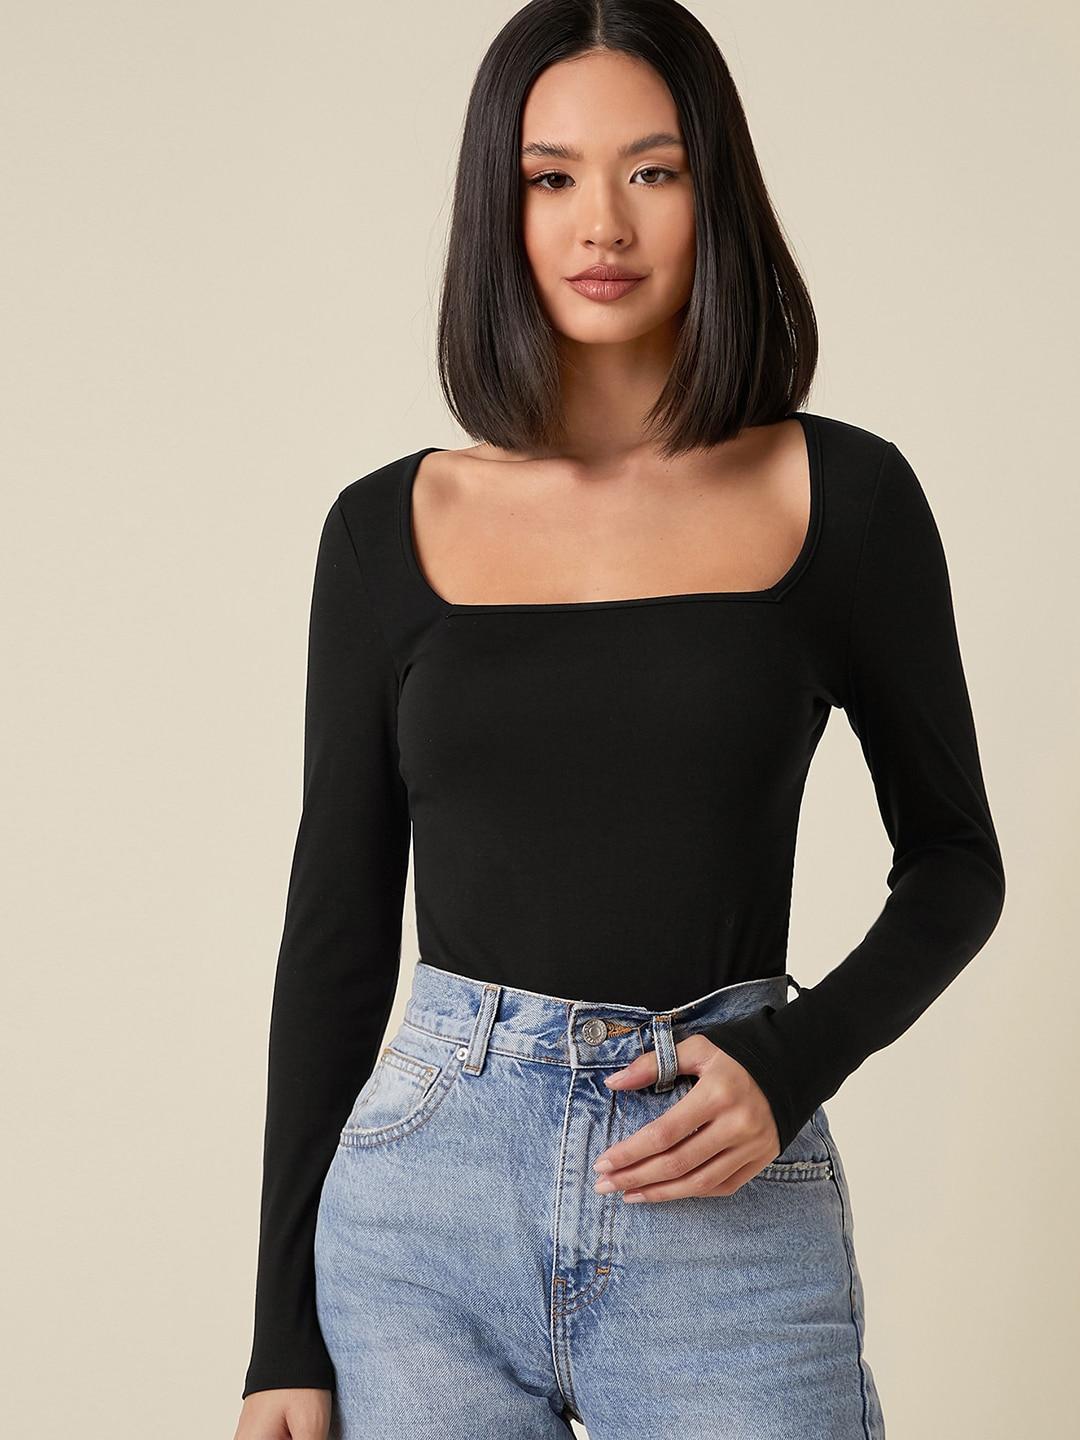 AAHWAN Black Solid Basic Square Neck Top